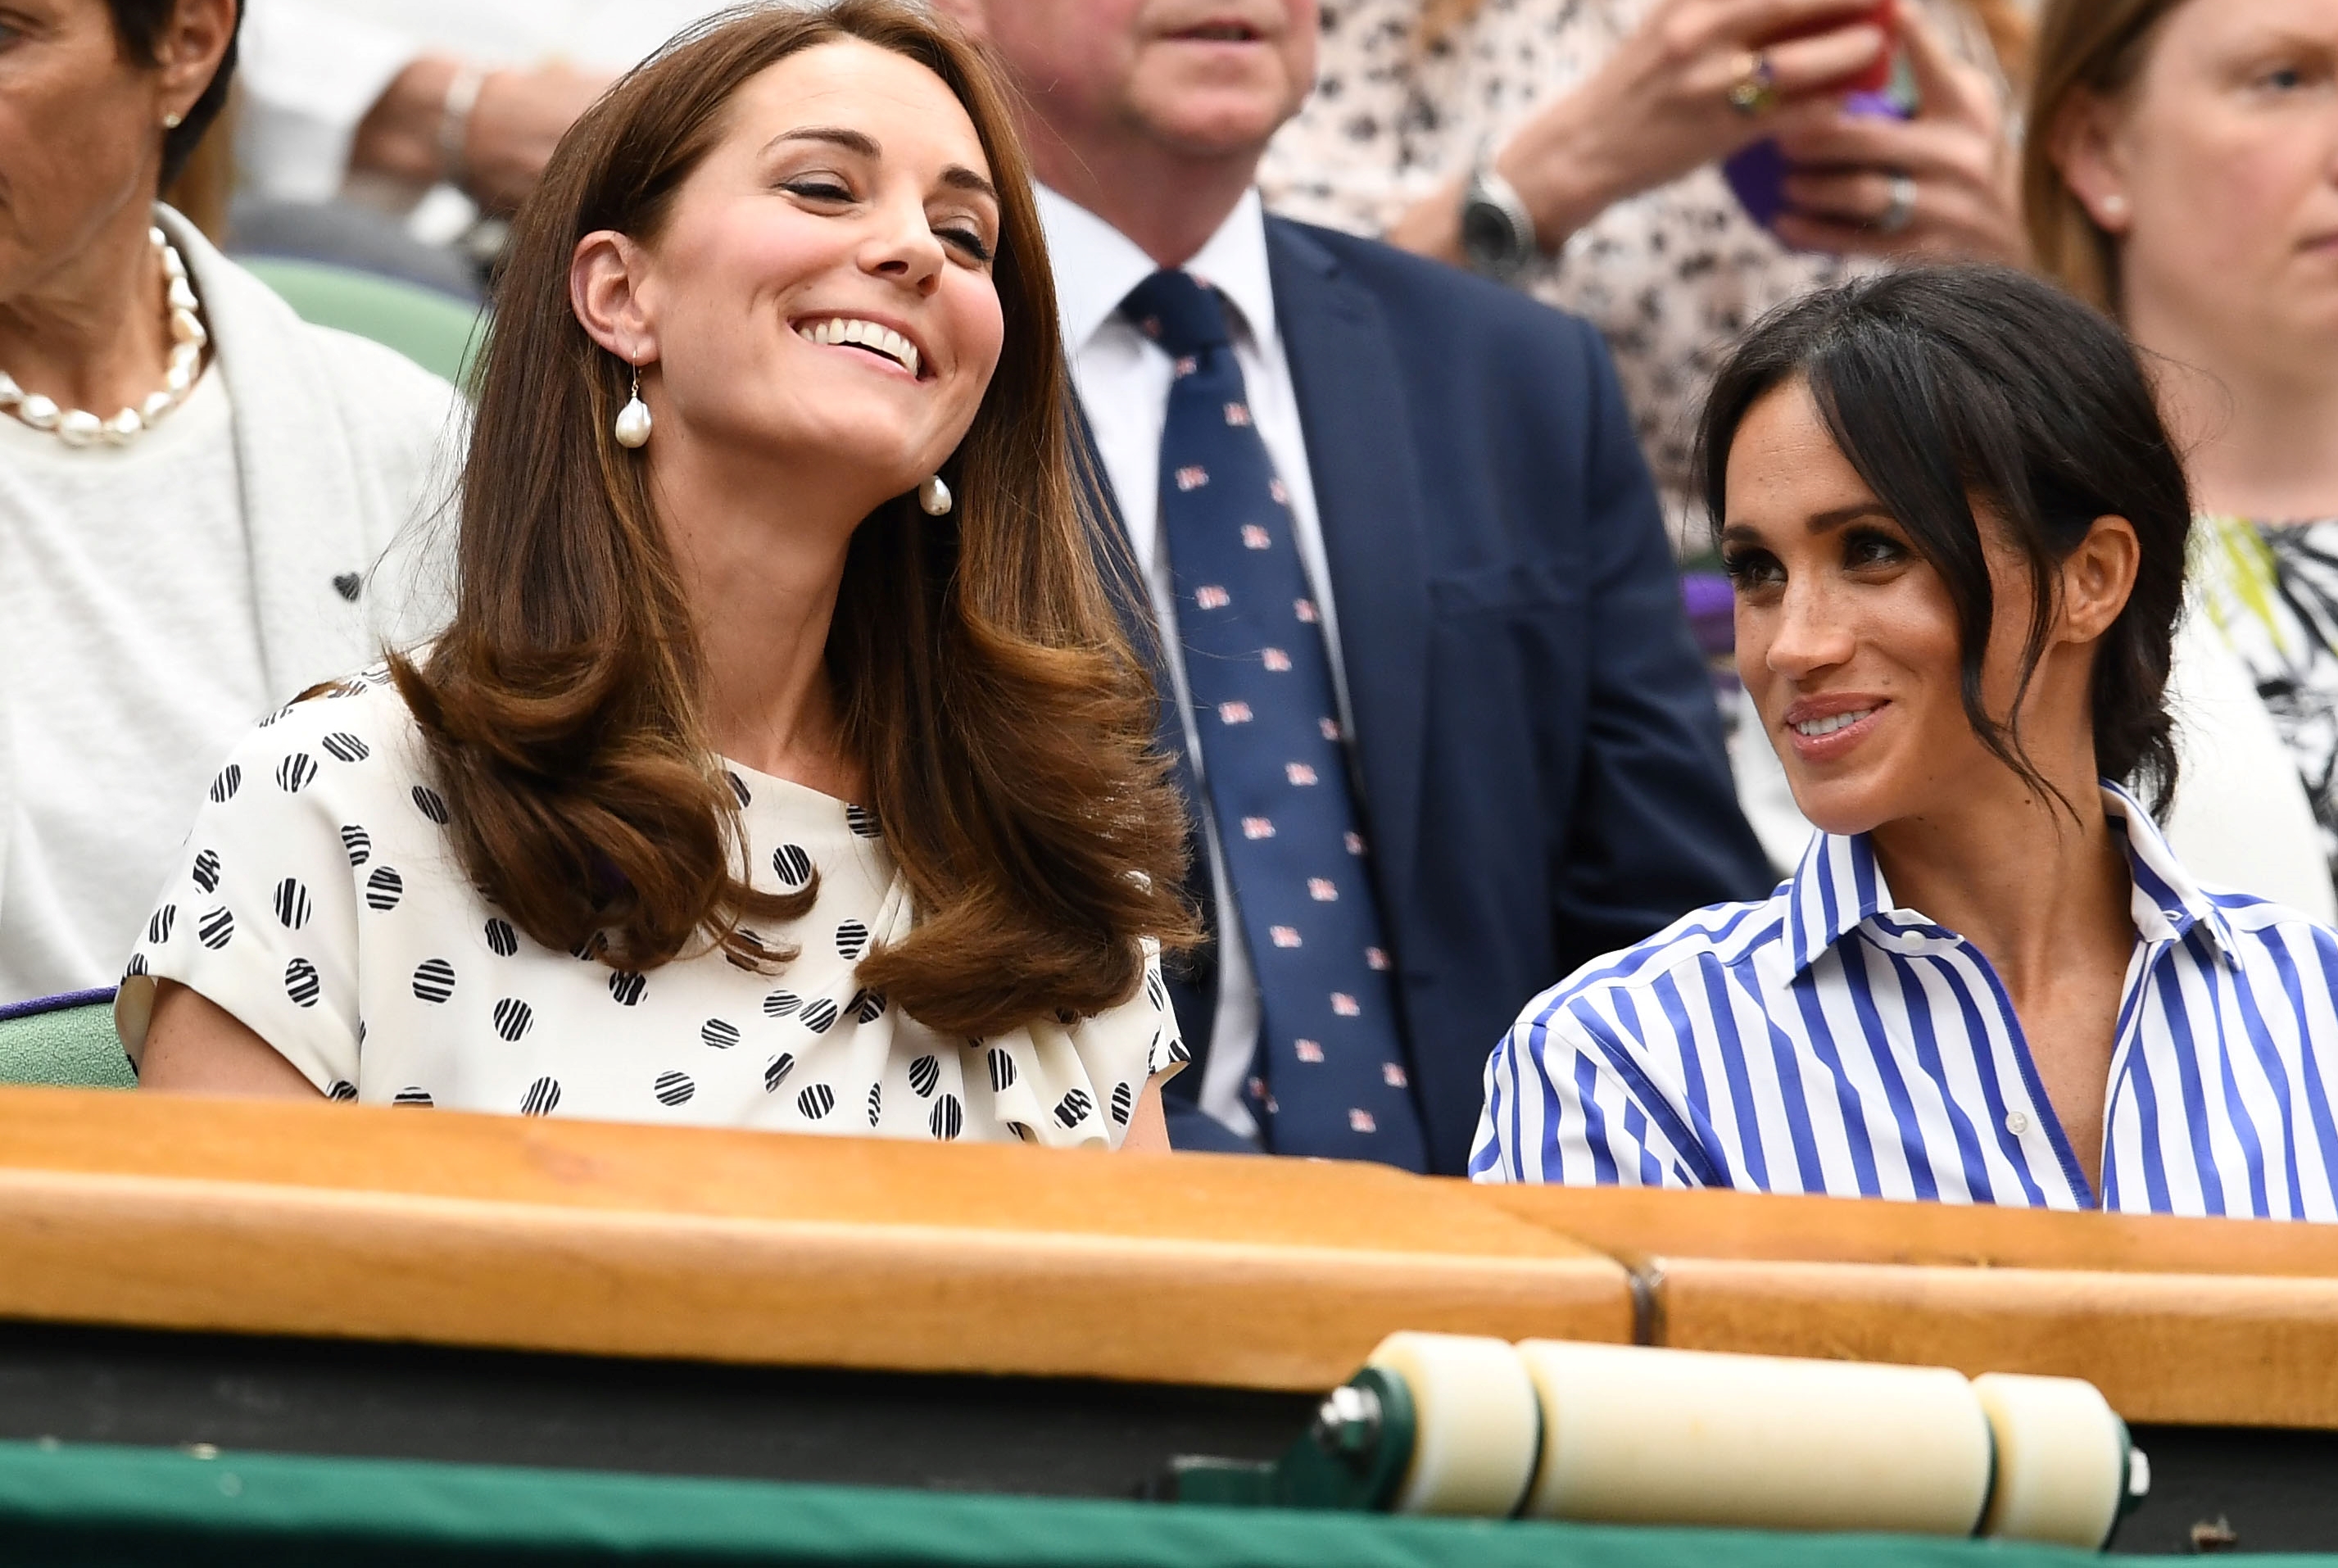 Kate Middleton and Meghan Markle smiling and laughing at the Wimbledon Tennis Championships in 2018 